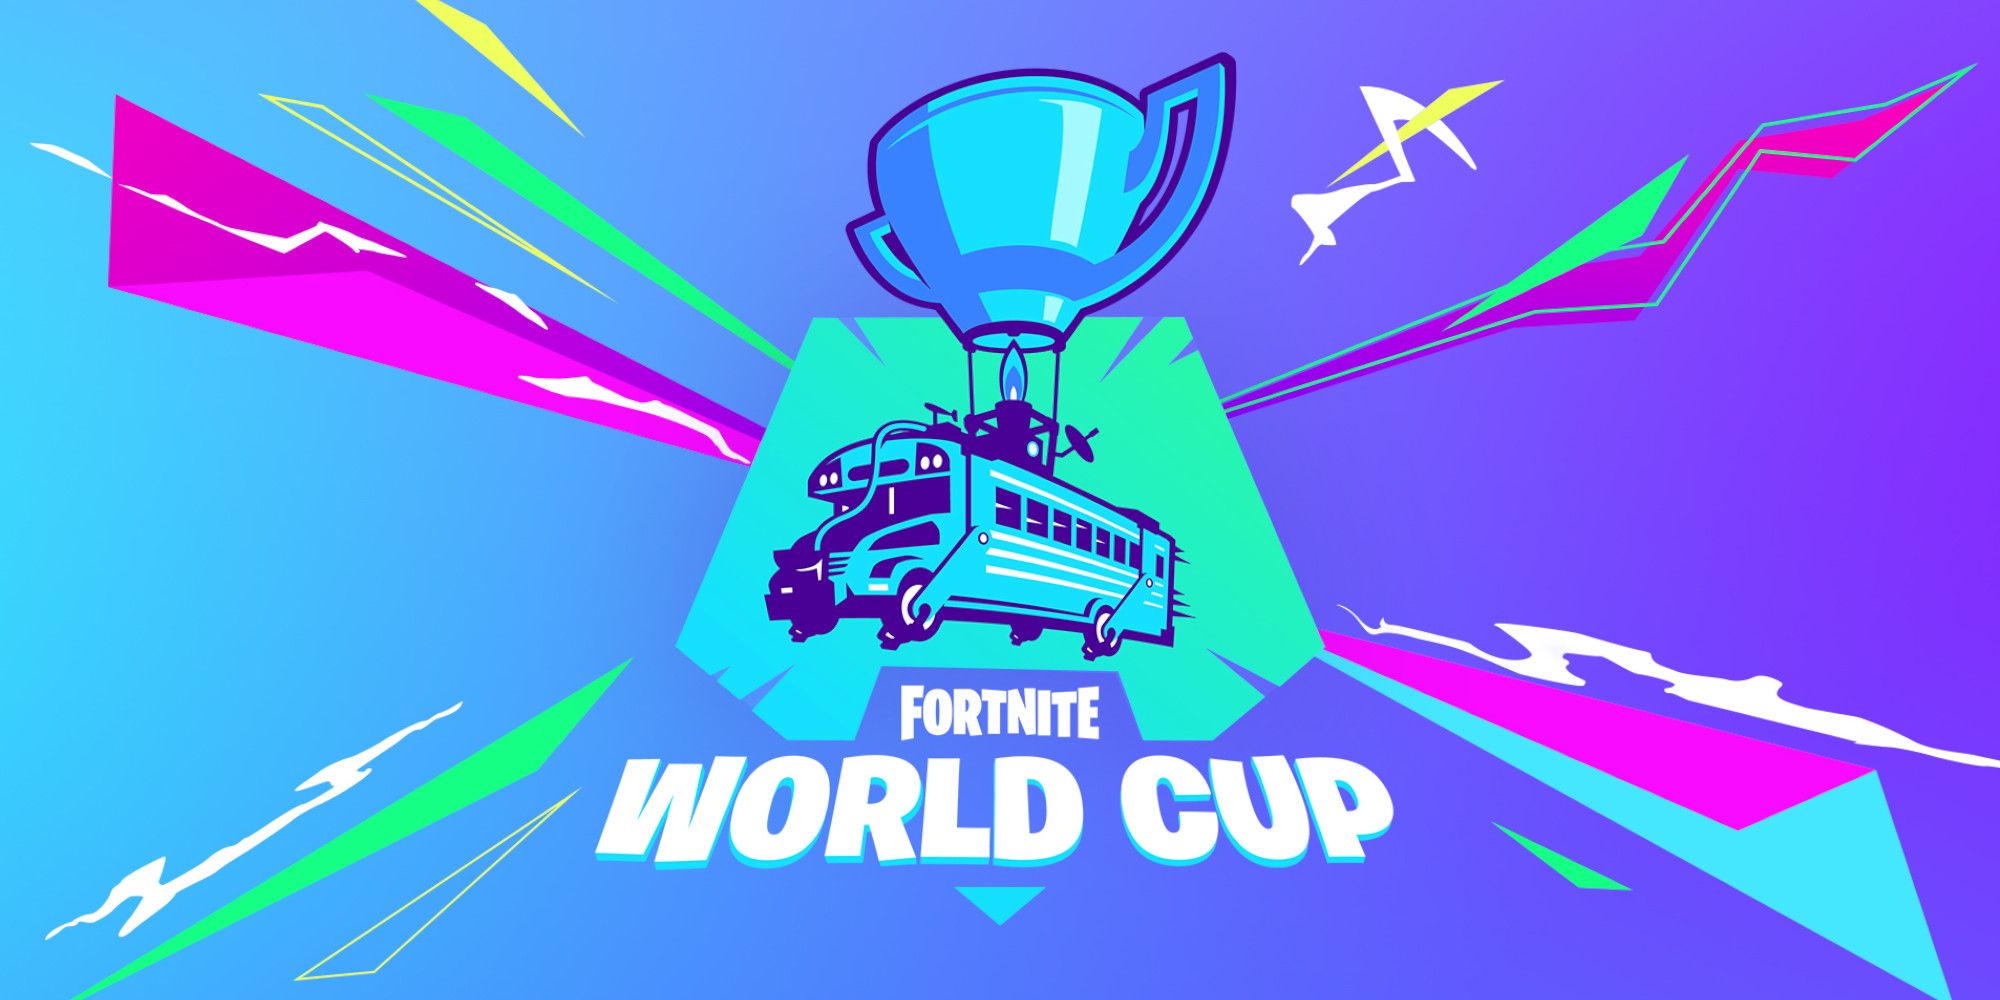 Fortnite World Cup's logo showing the battle bus with a trophy